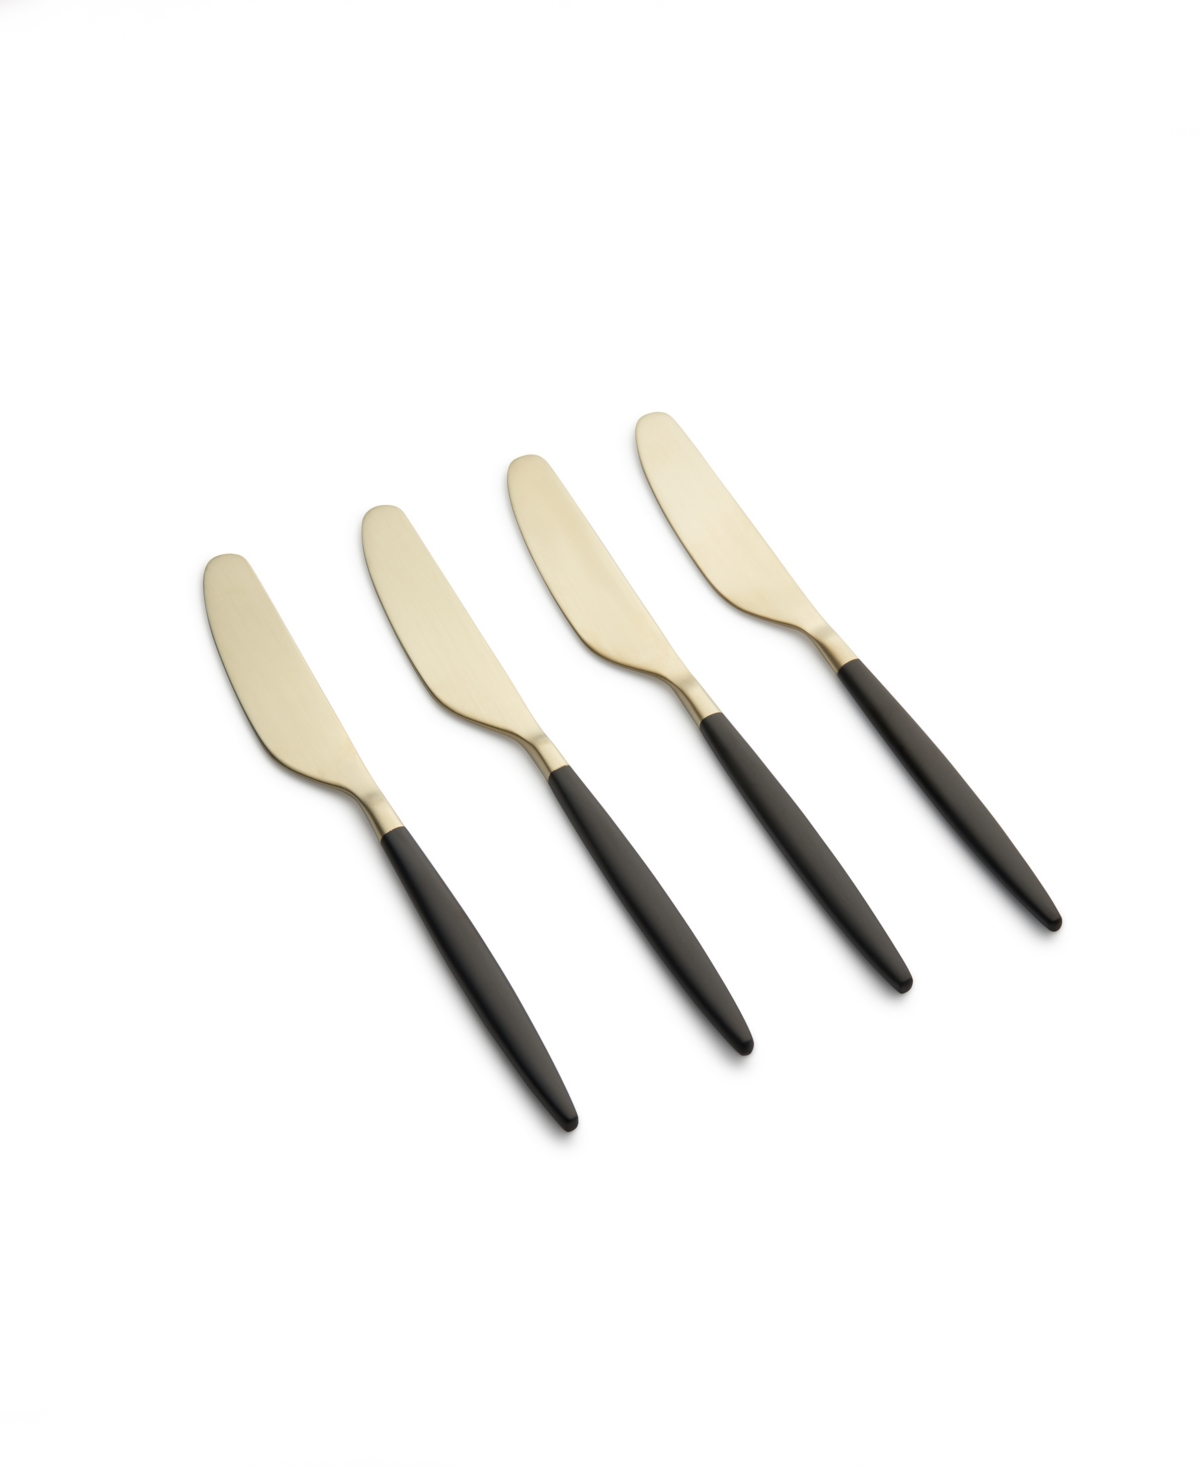 Cambridge Silversmiths Gaze Two Tone Black-gold Satin Spreaders Set, 4 Piece In Black And Champagne Gold-tone